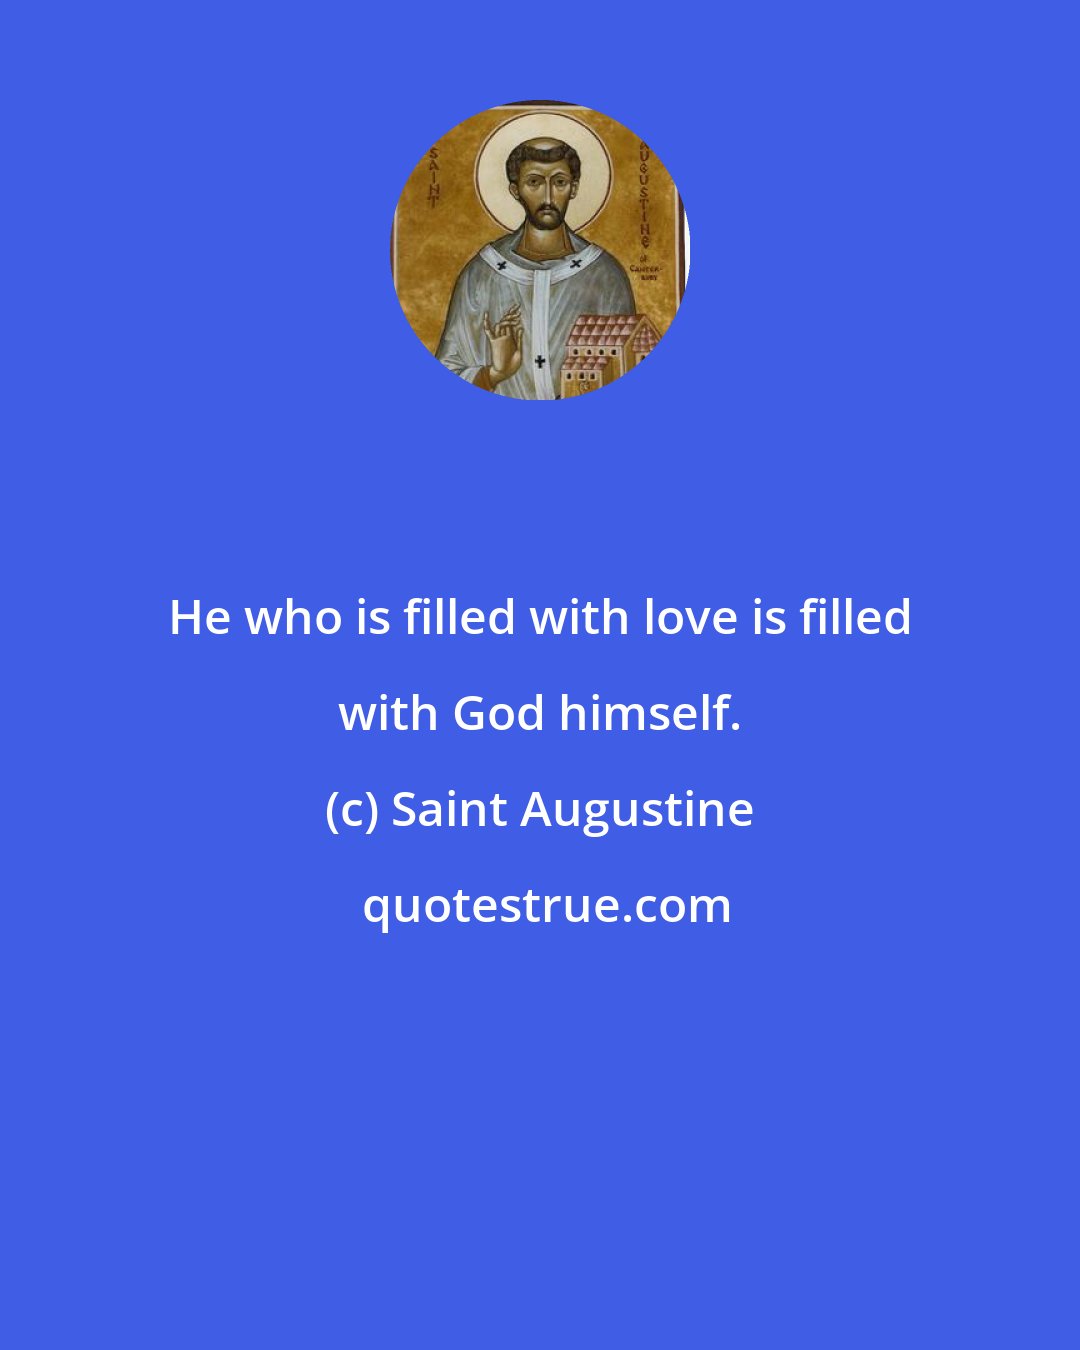 Saint Augustine: He who is filled with love is filled with God himself.